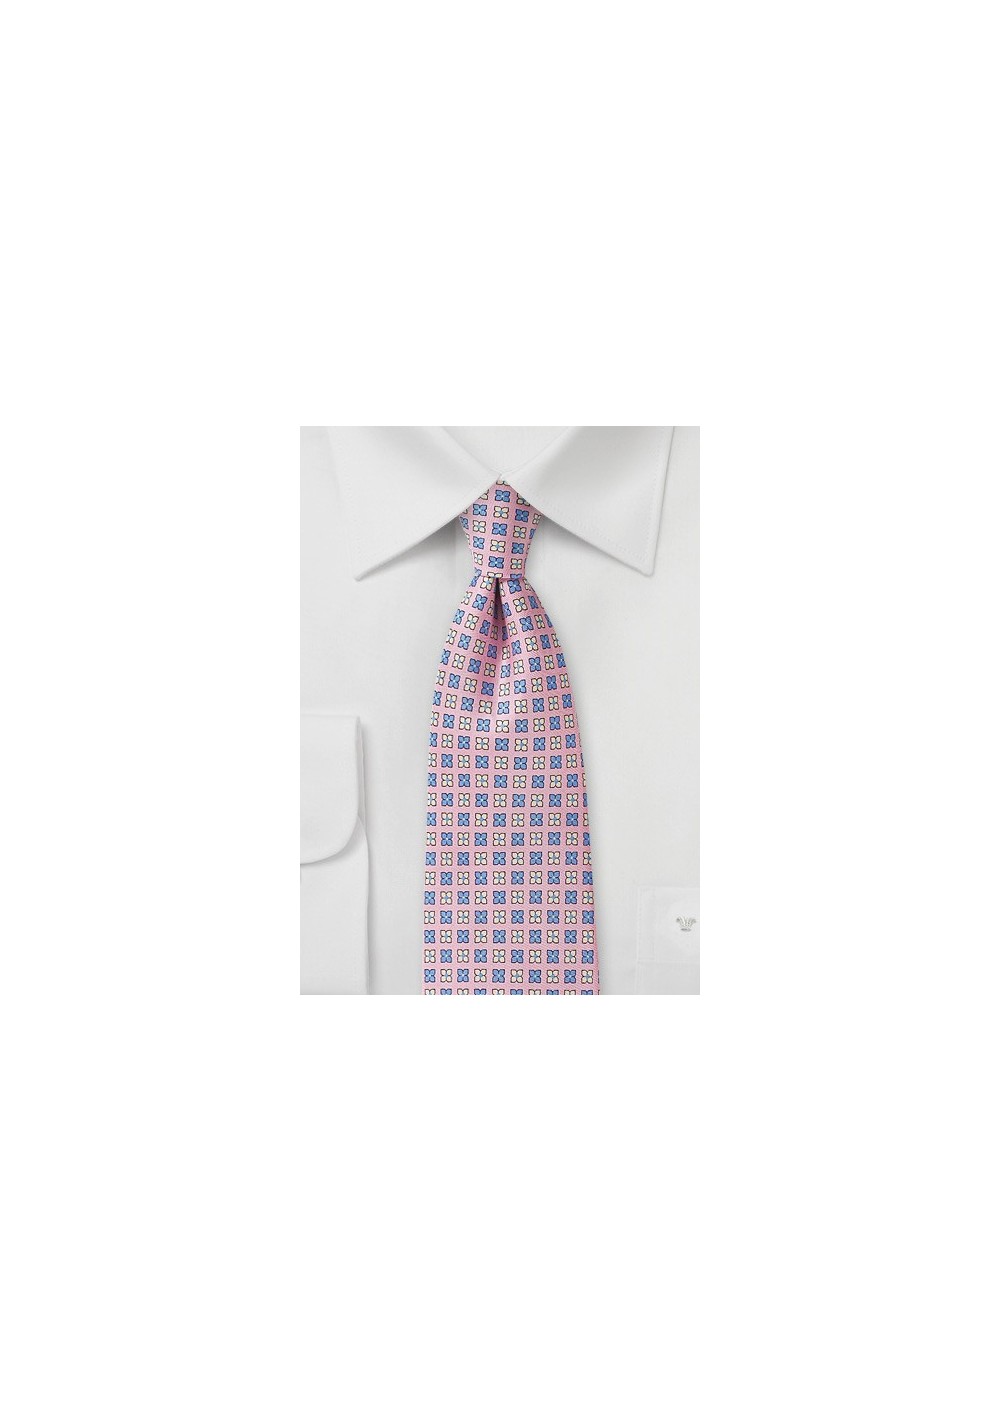 Floral Tie in Pink, Lavender, and Cream